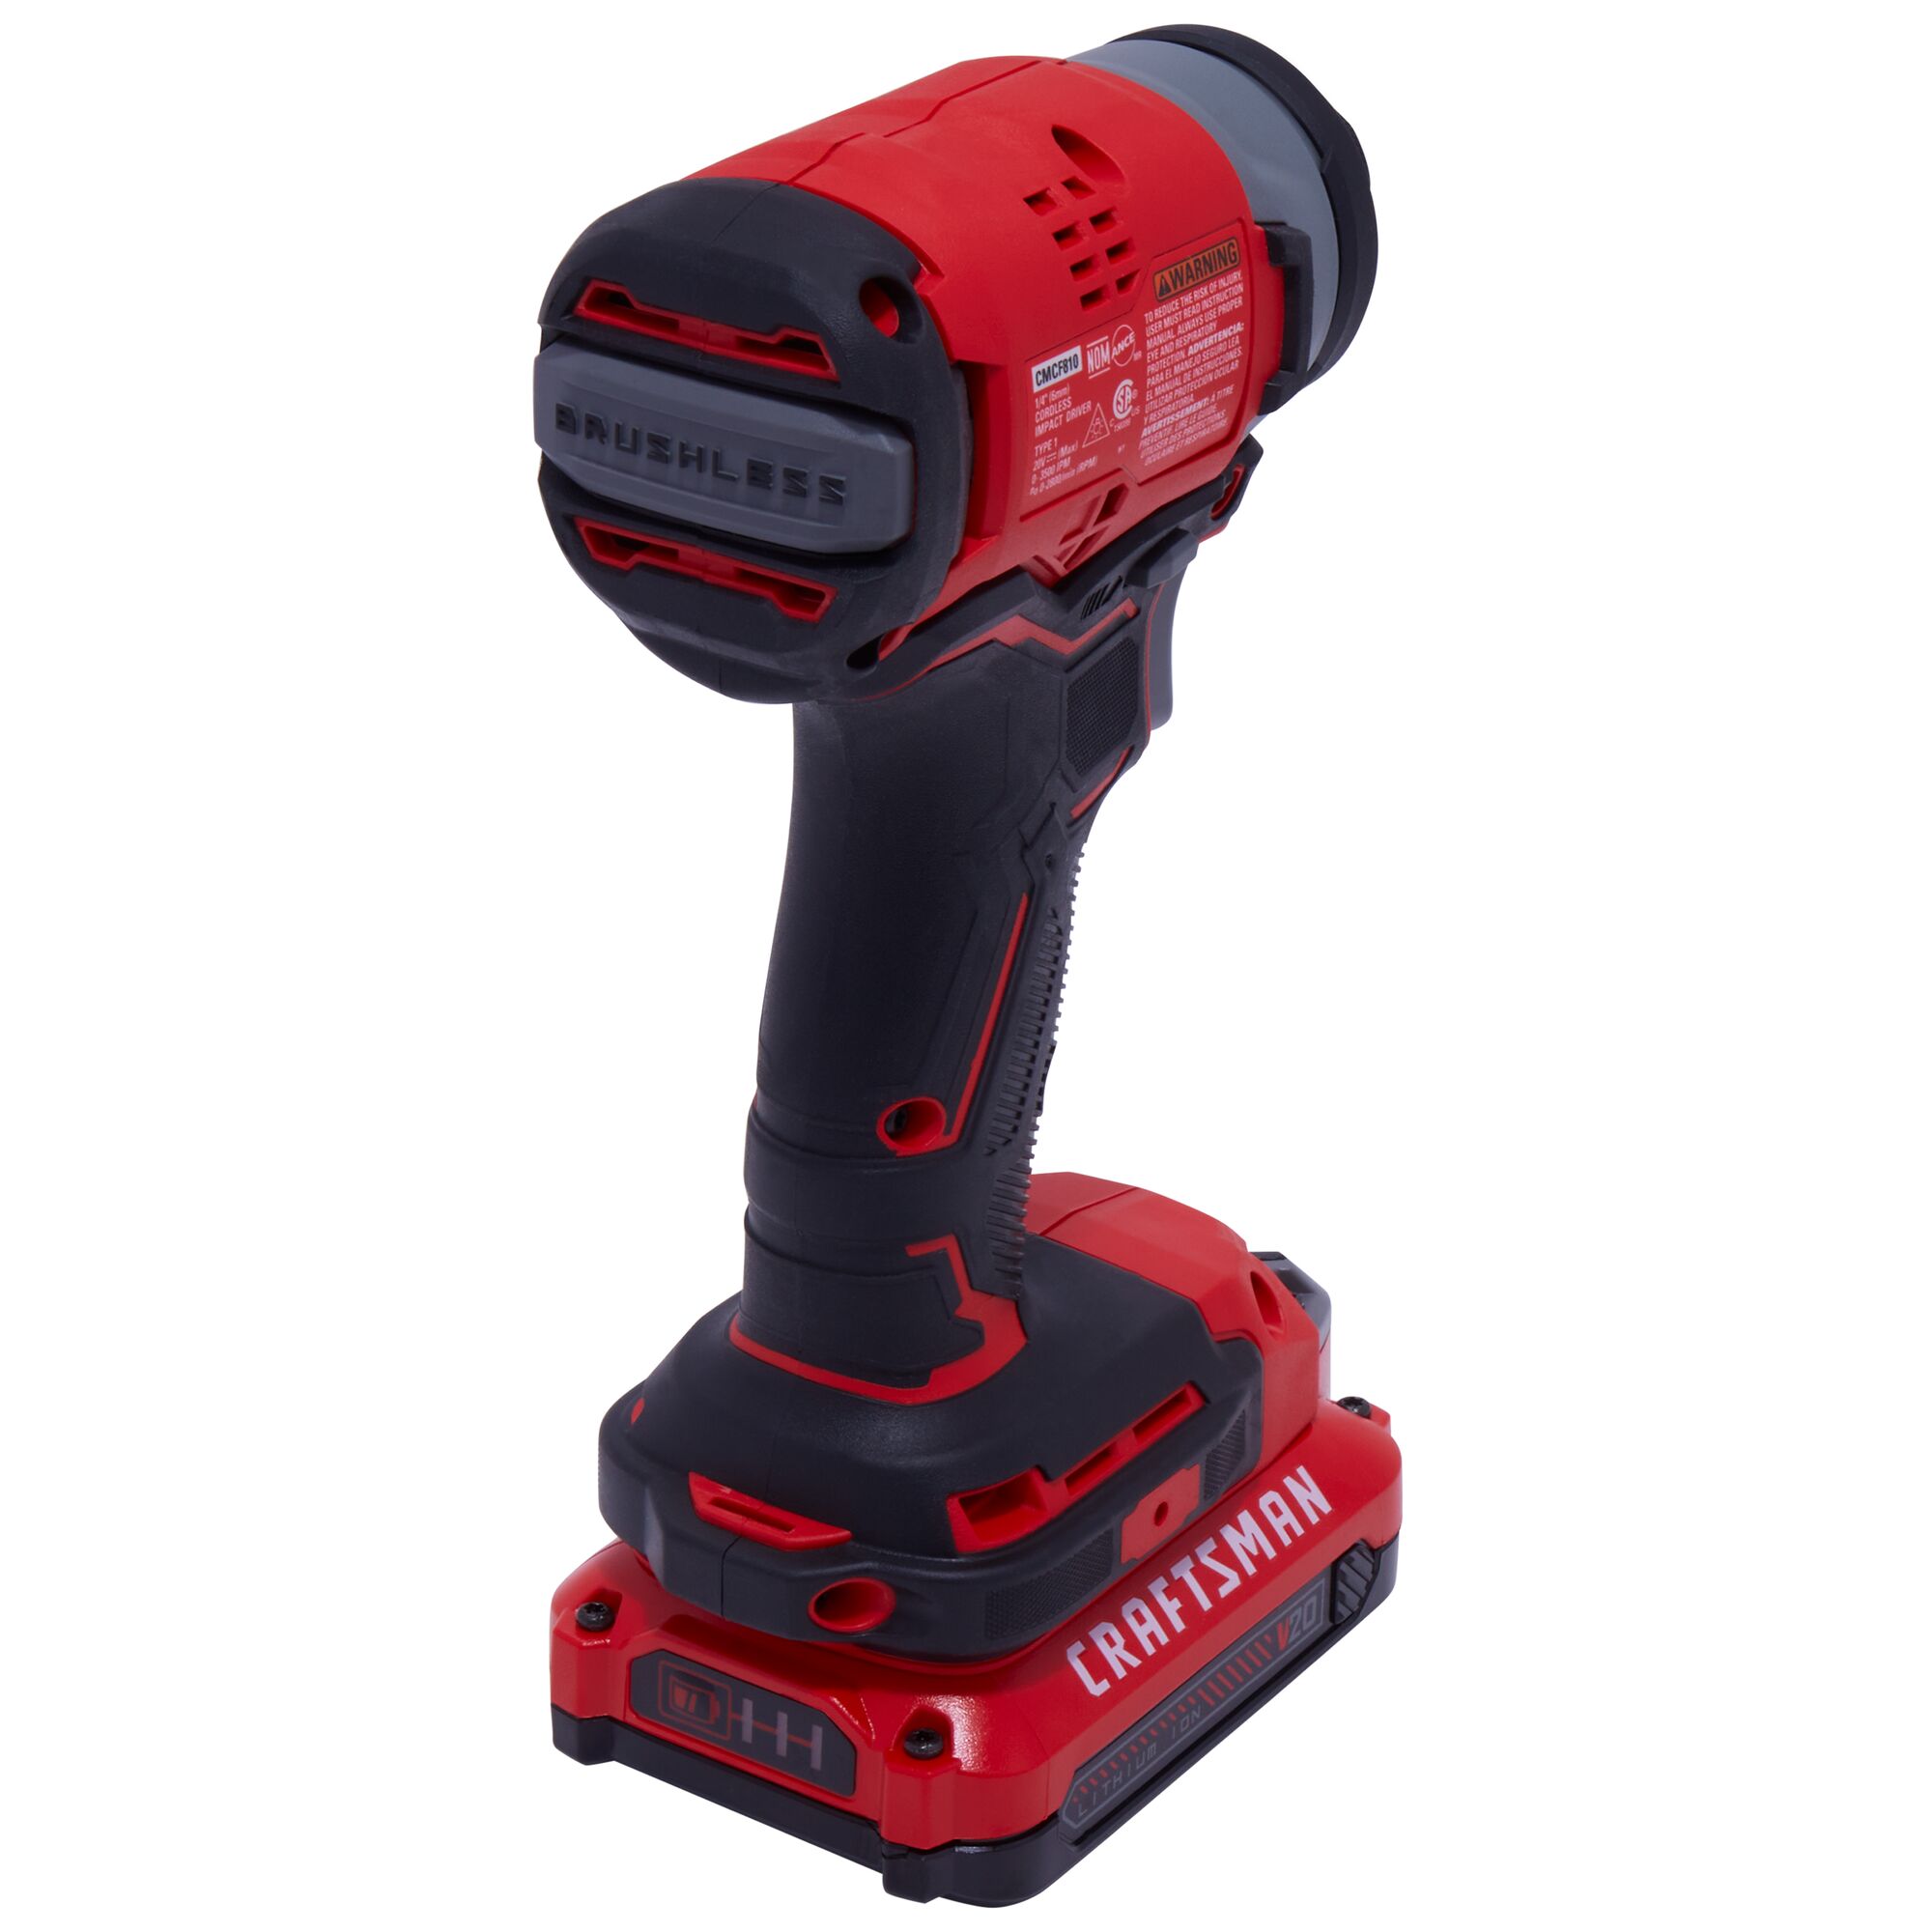 Front view of Craftsman 20V Max ¼ in. Brushless Cordless Impact Driver.